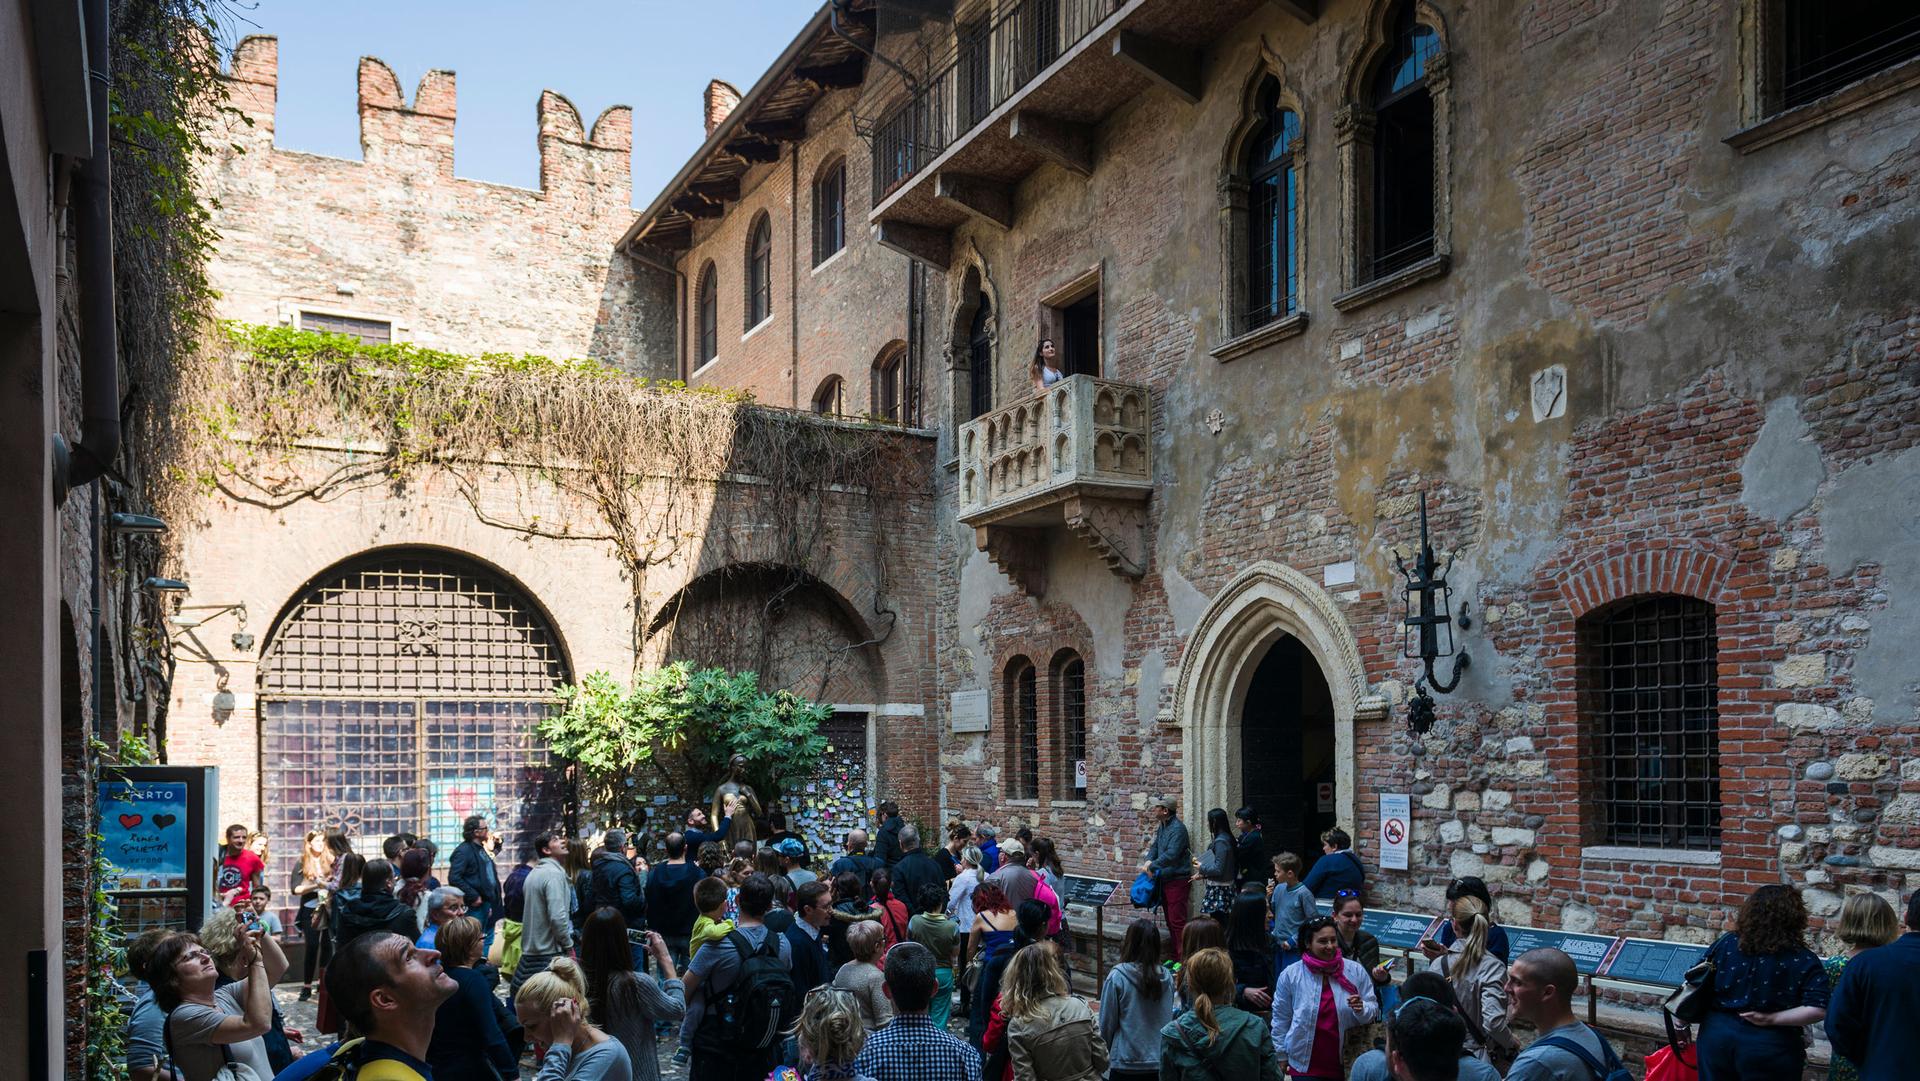 The backyard of Juliet's house in Verona with the famous balcony full of tourists.